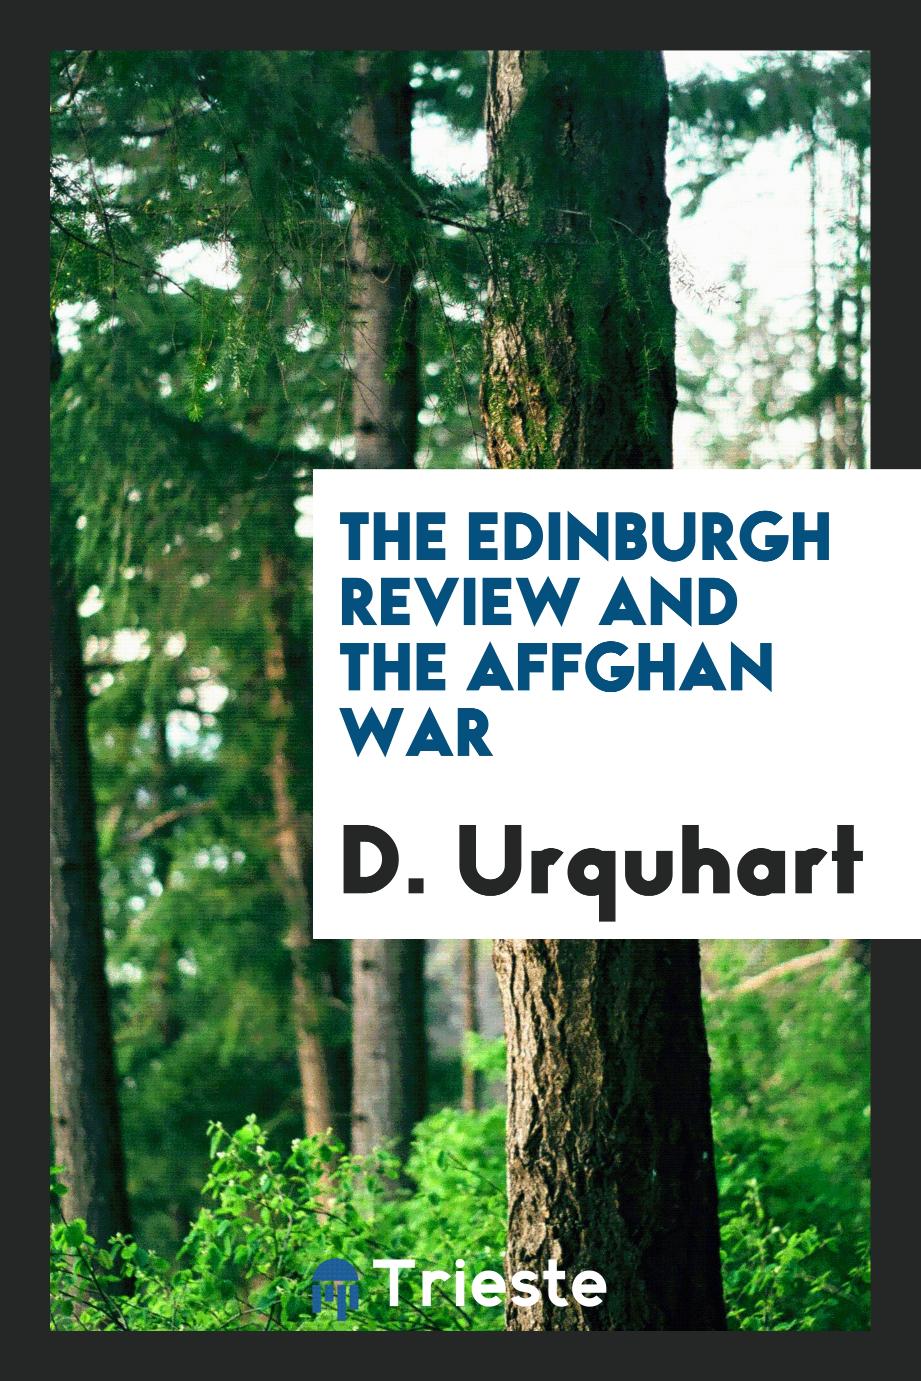 The Edinburgh review and the Affghan war